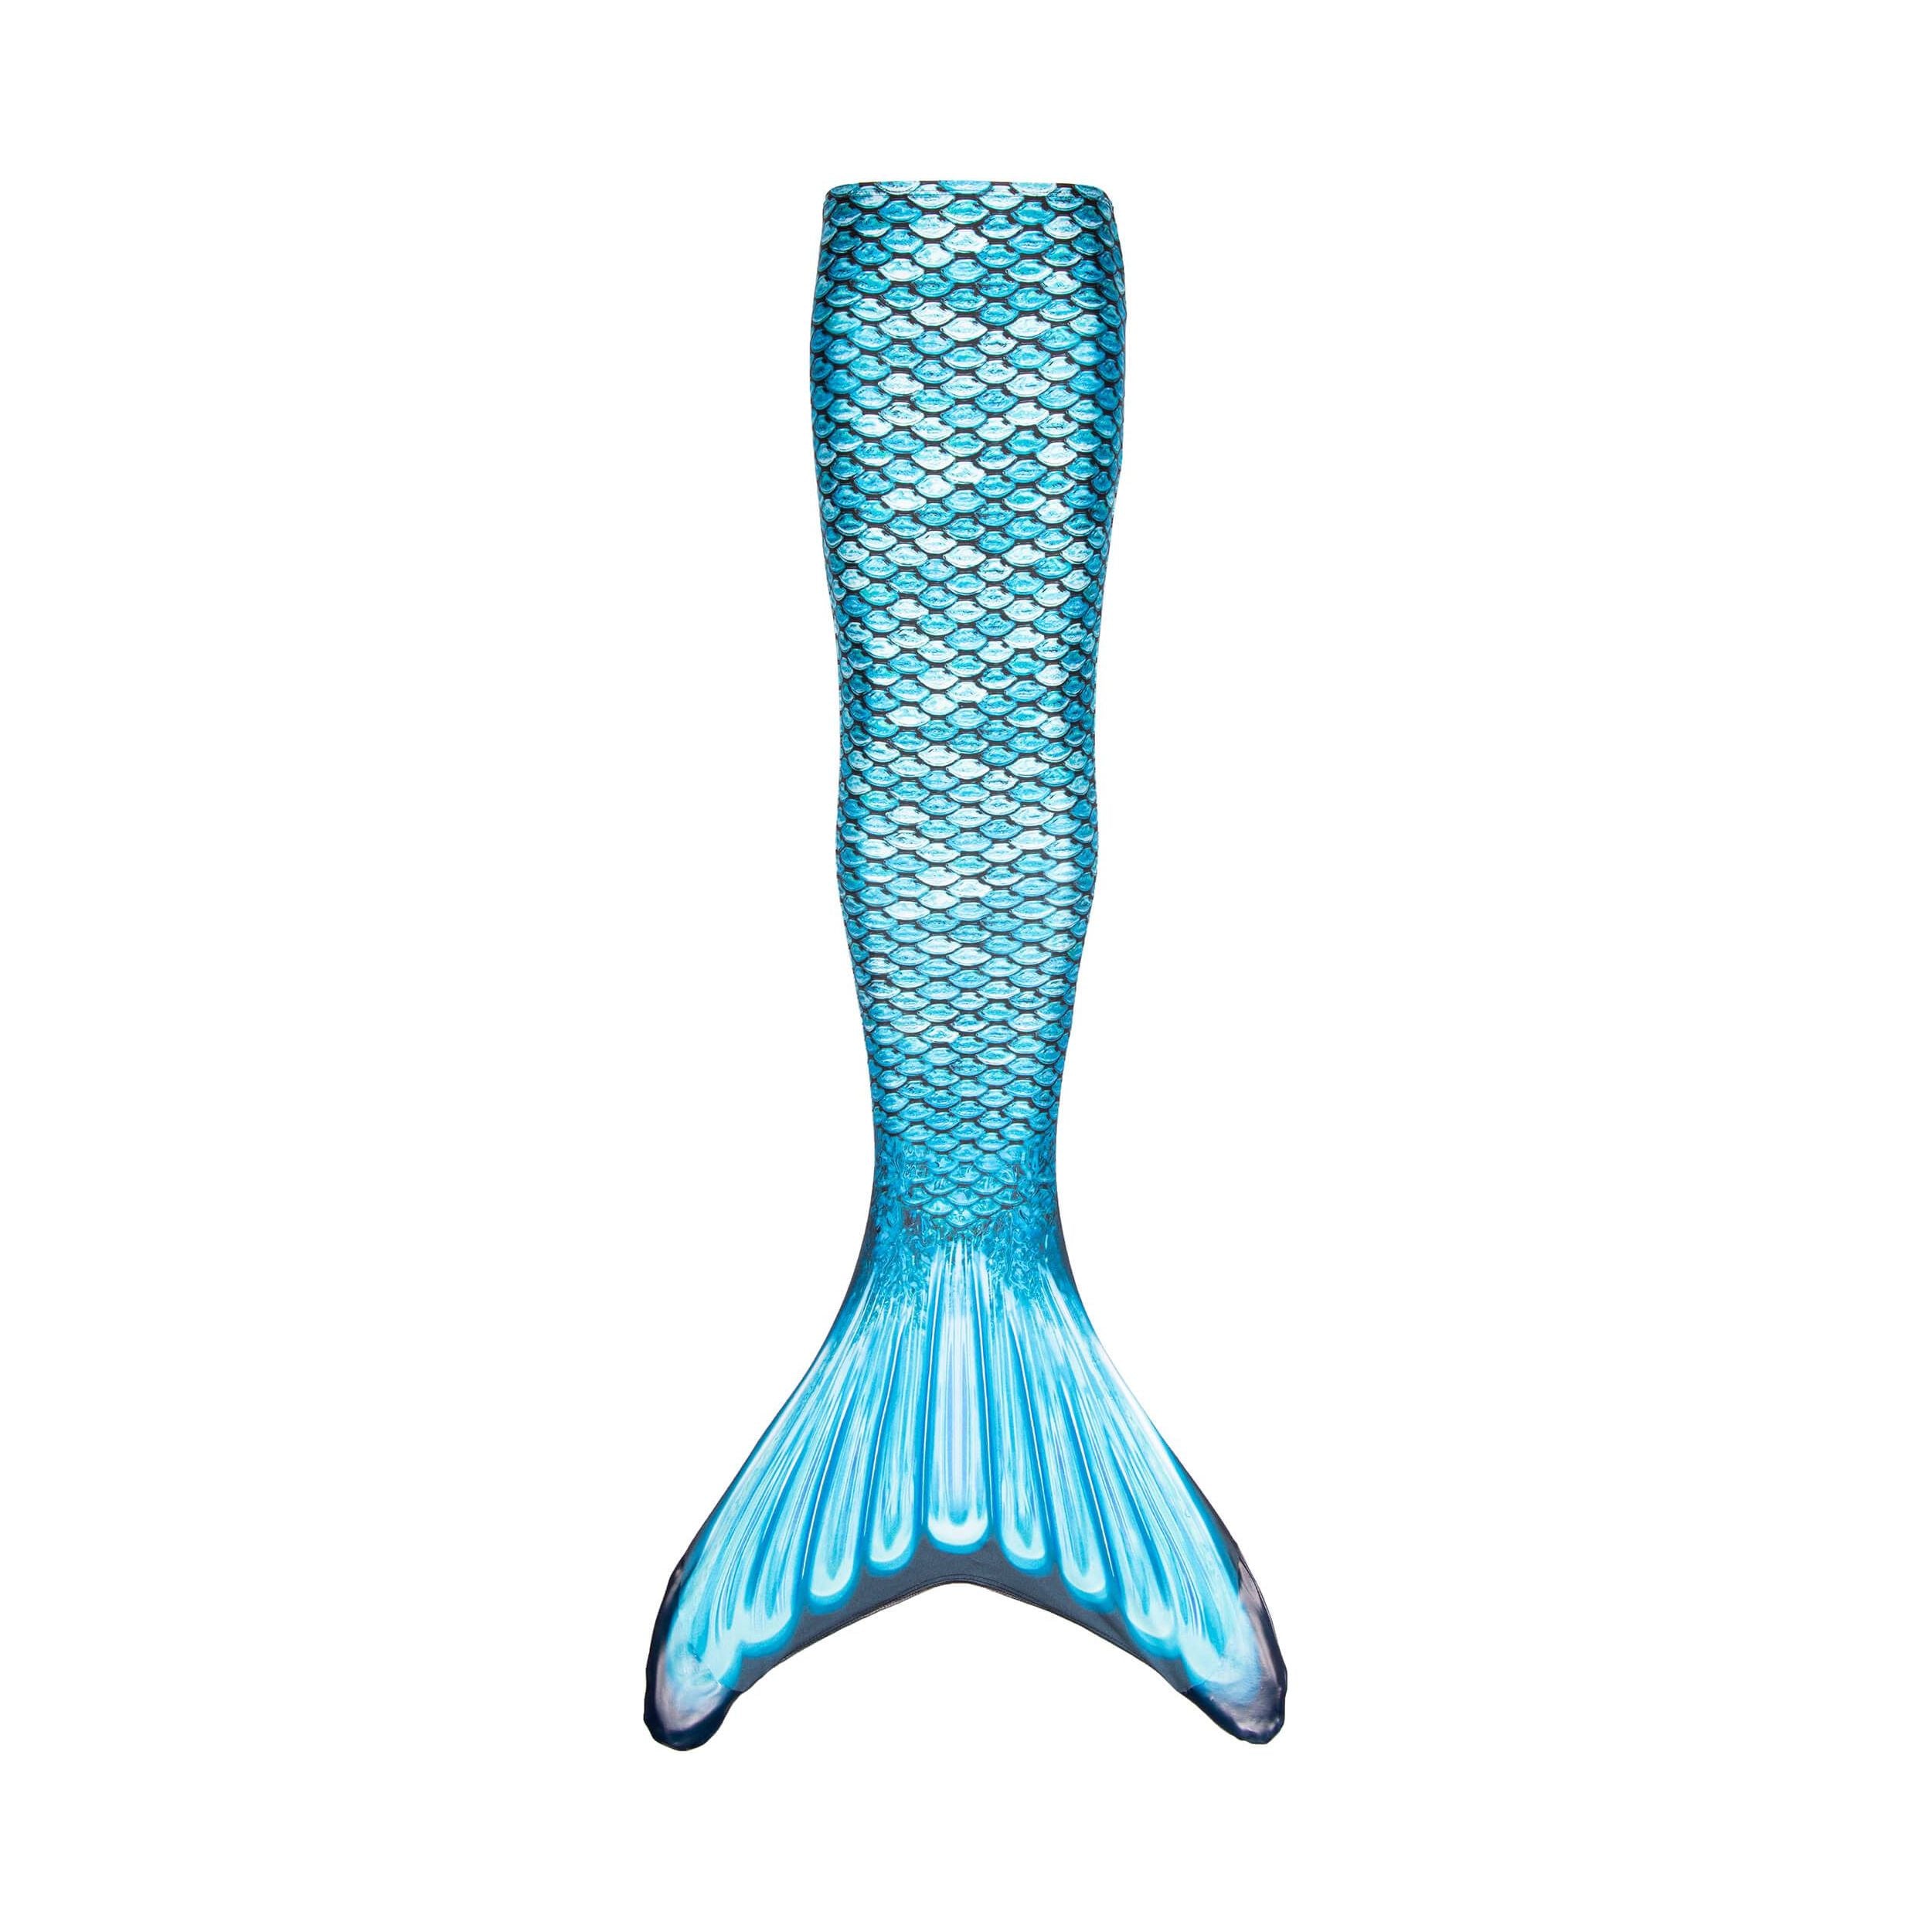 Fin Fun Mermaid Tail with Monofin Mariana's Teal Adult Large